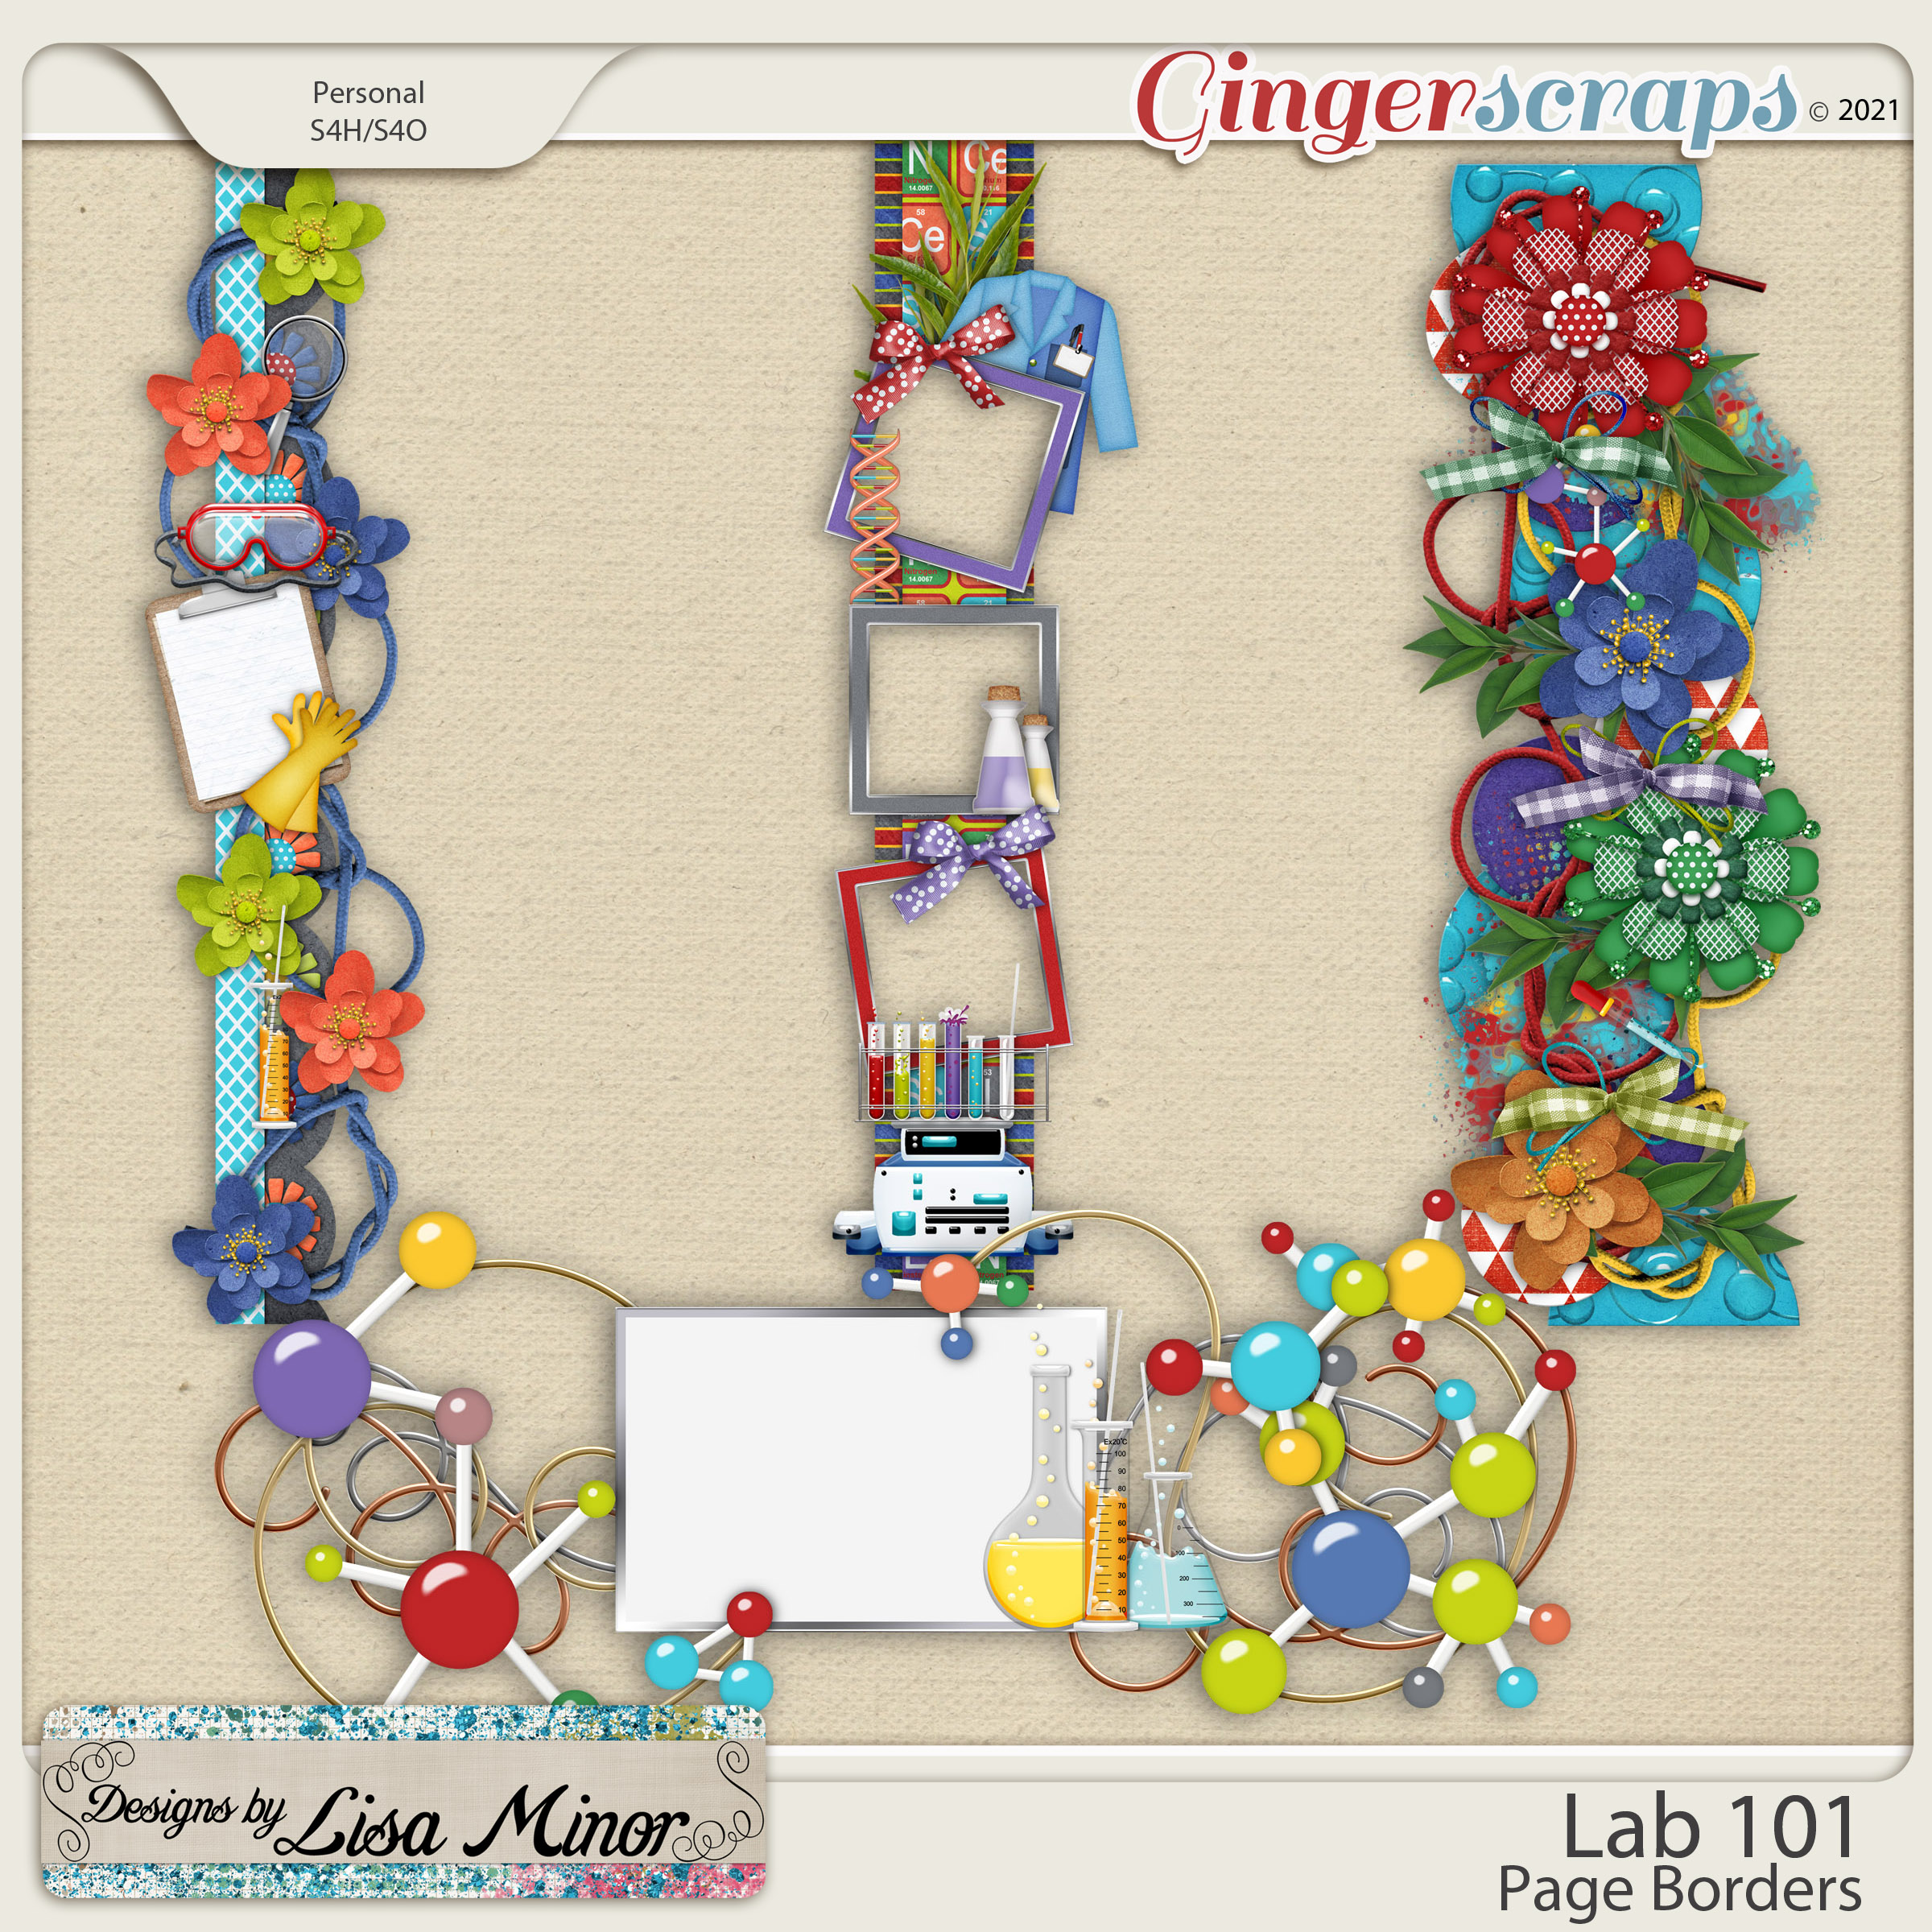 Lab 101 Page Borders from Designs by Lisa Minor